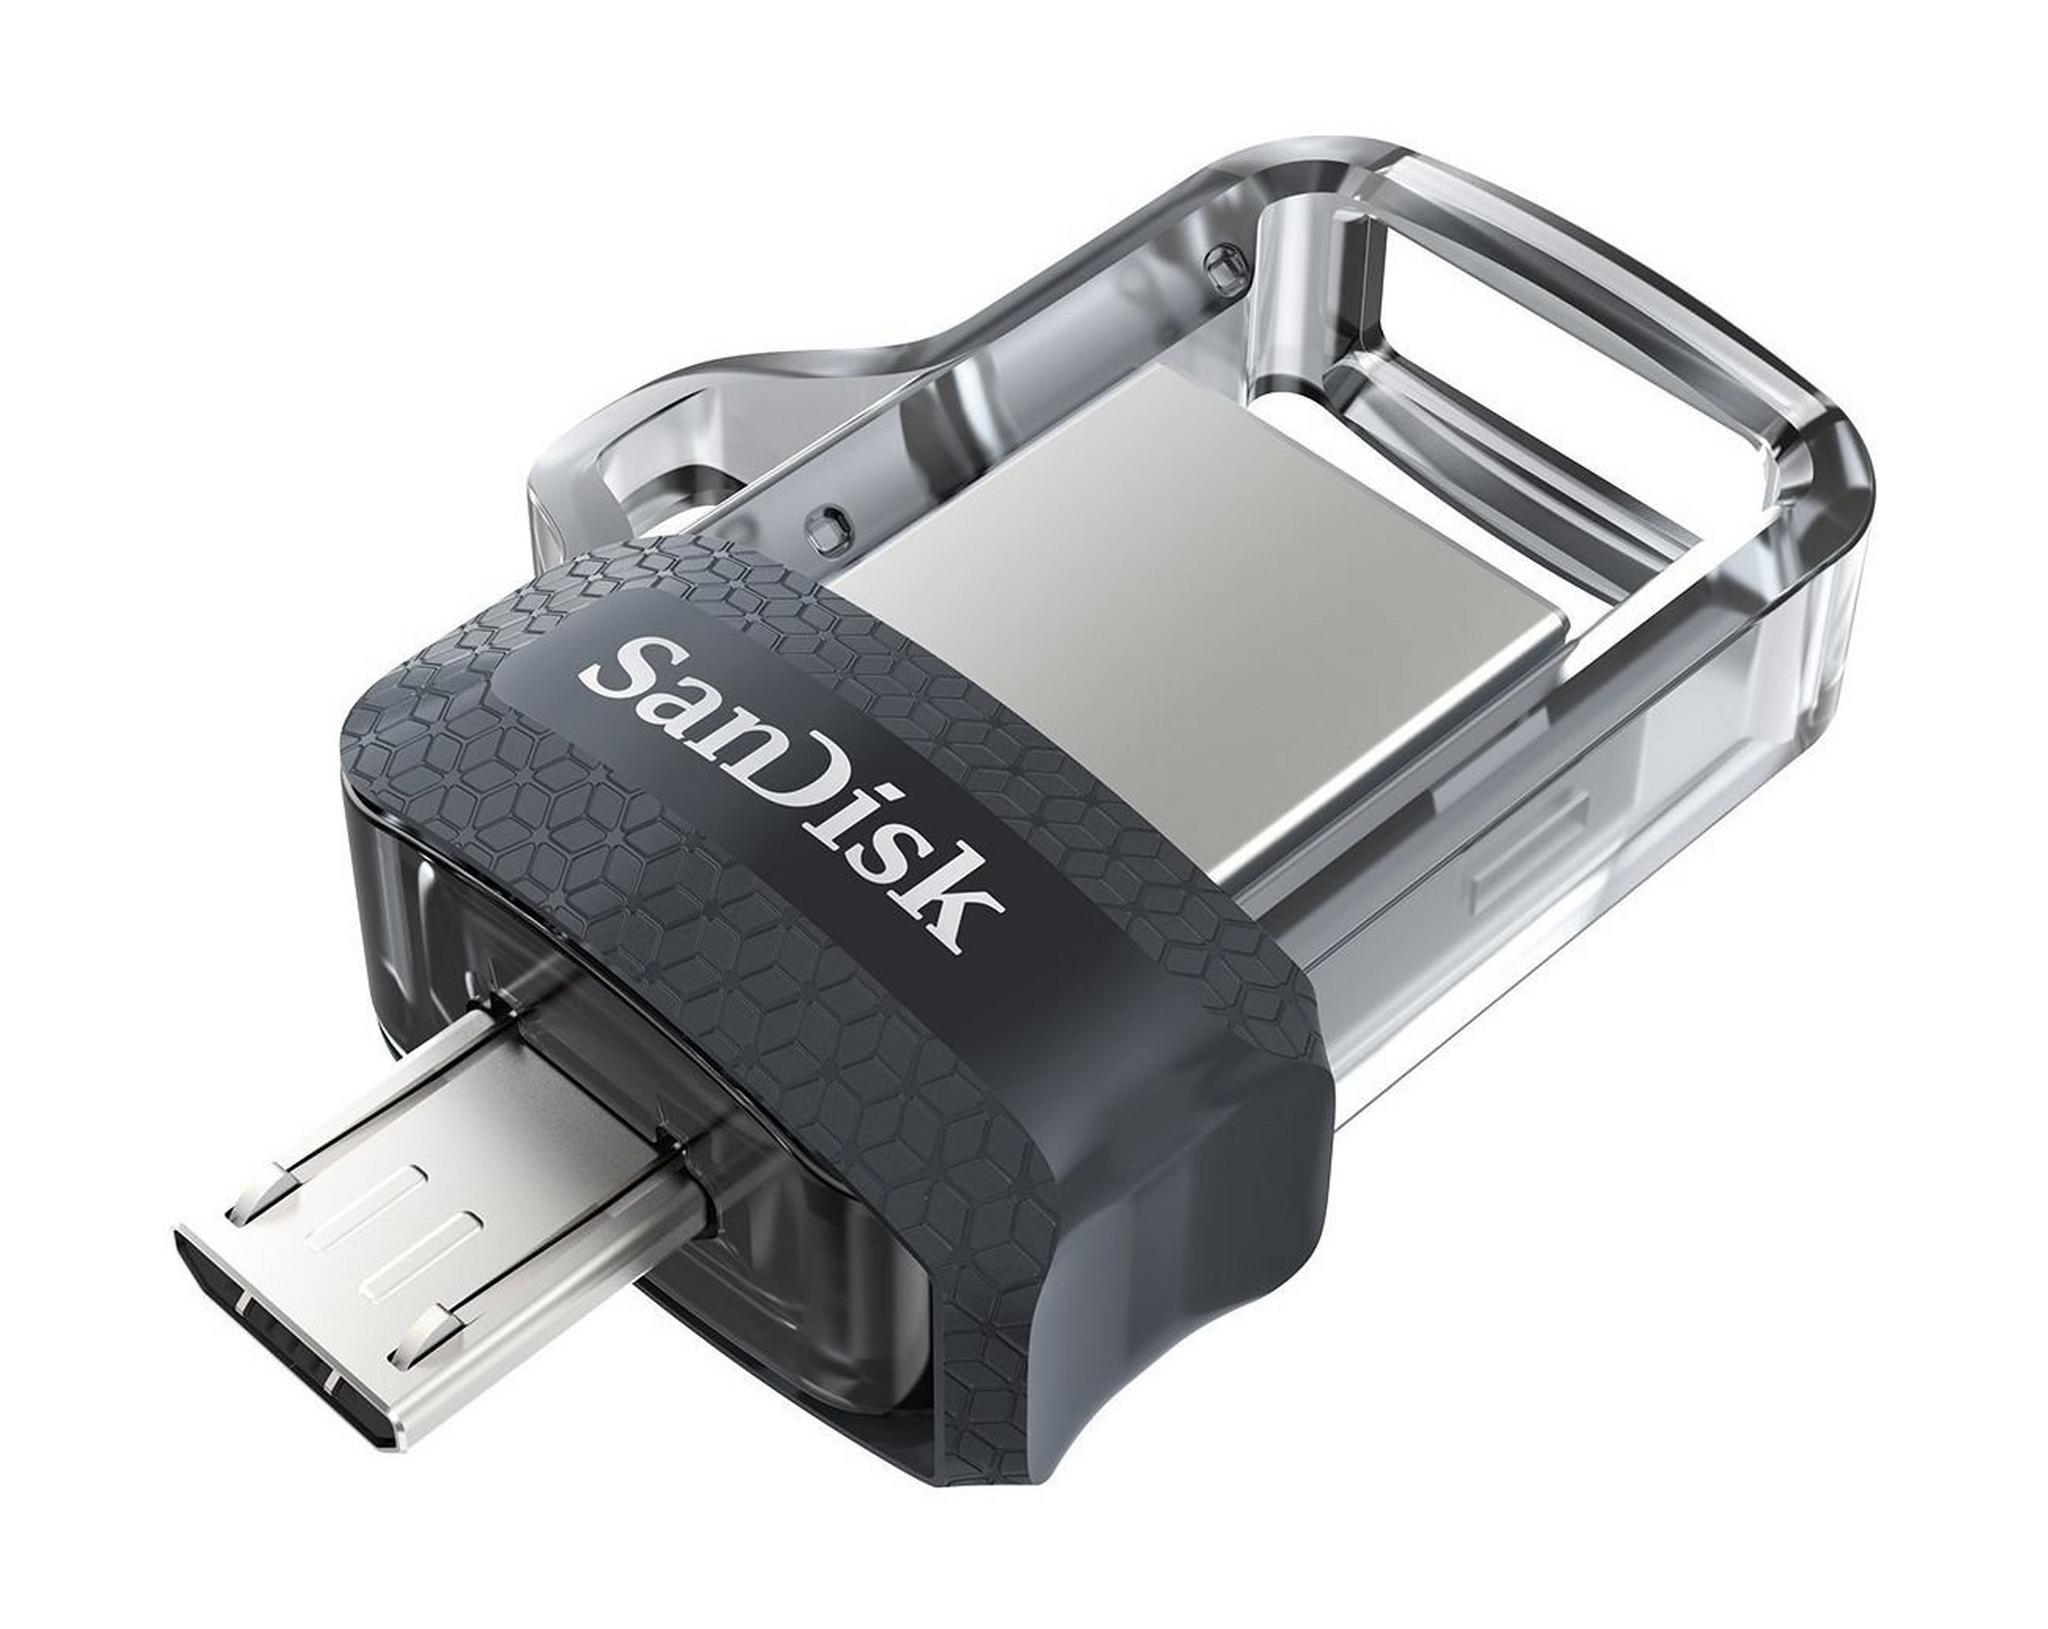 Sandisk 128GB M3.0 Dual USB Drive for Android Devices & Computer - (DD3-128G-G46)